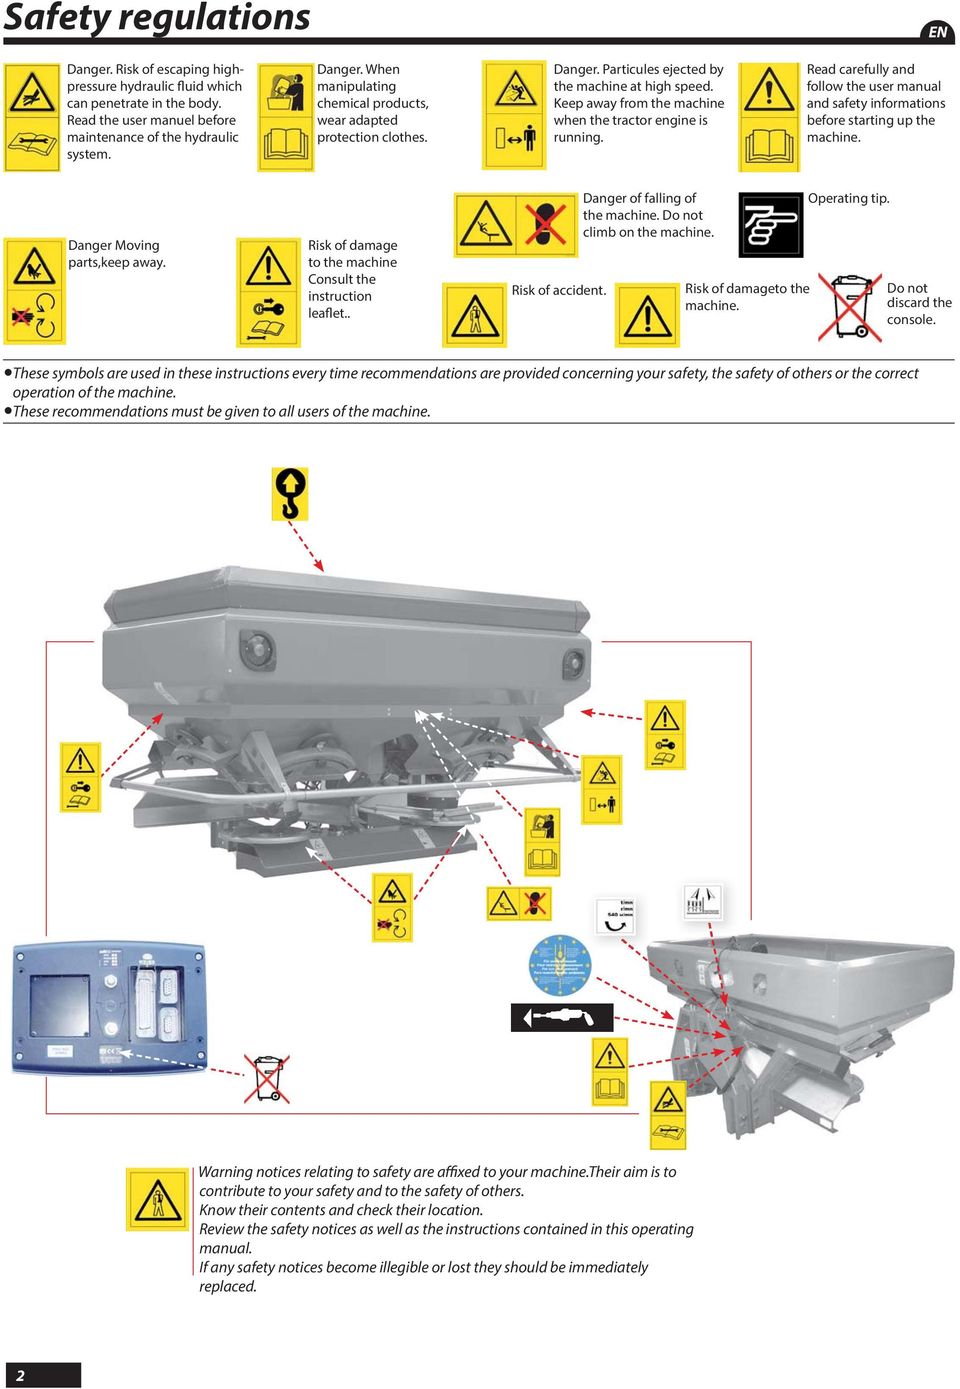 Read carefully and follow the user manual and safety informations before starting up the machine. Danger Moving parts,keep away. Risk of damage to the machine Consult the instruction leaflet.